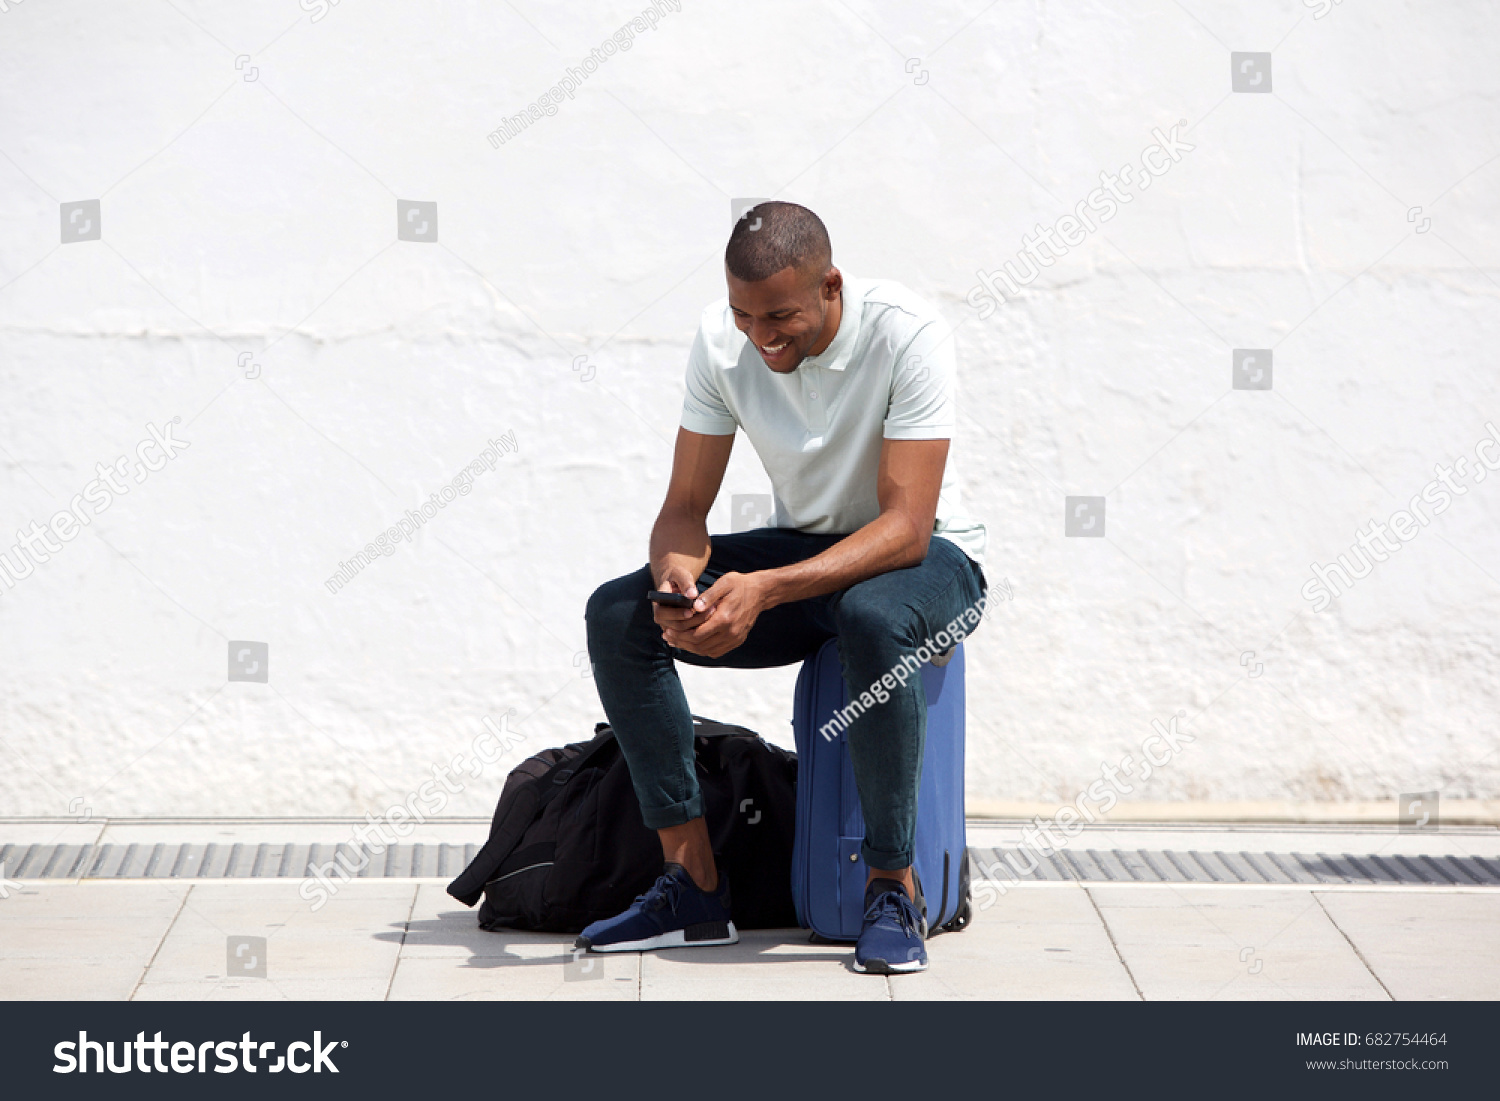 Full length portrait of african man sitting on suitcase and looking at mobile phone #682754464